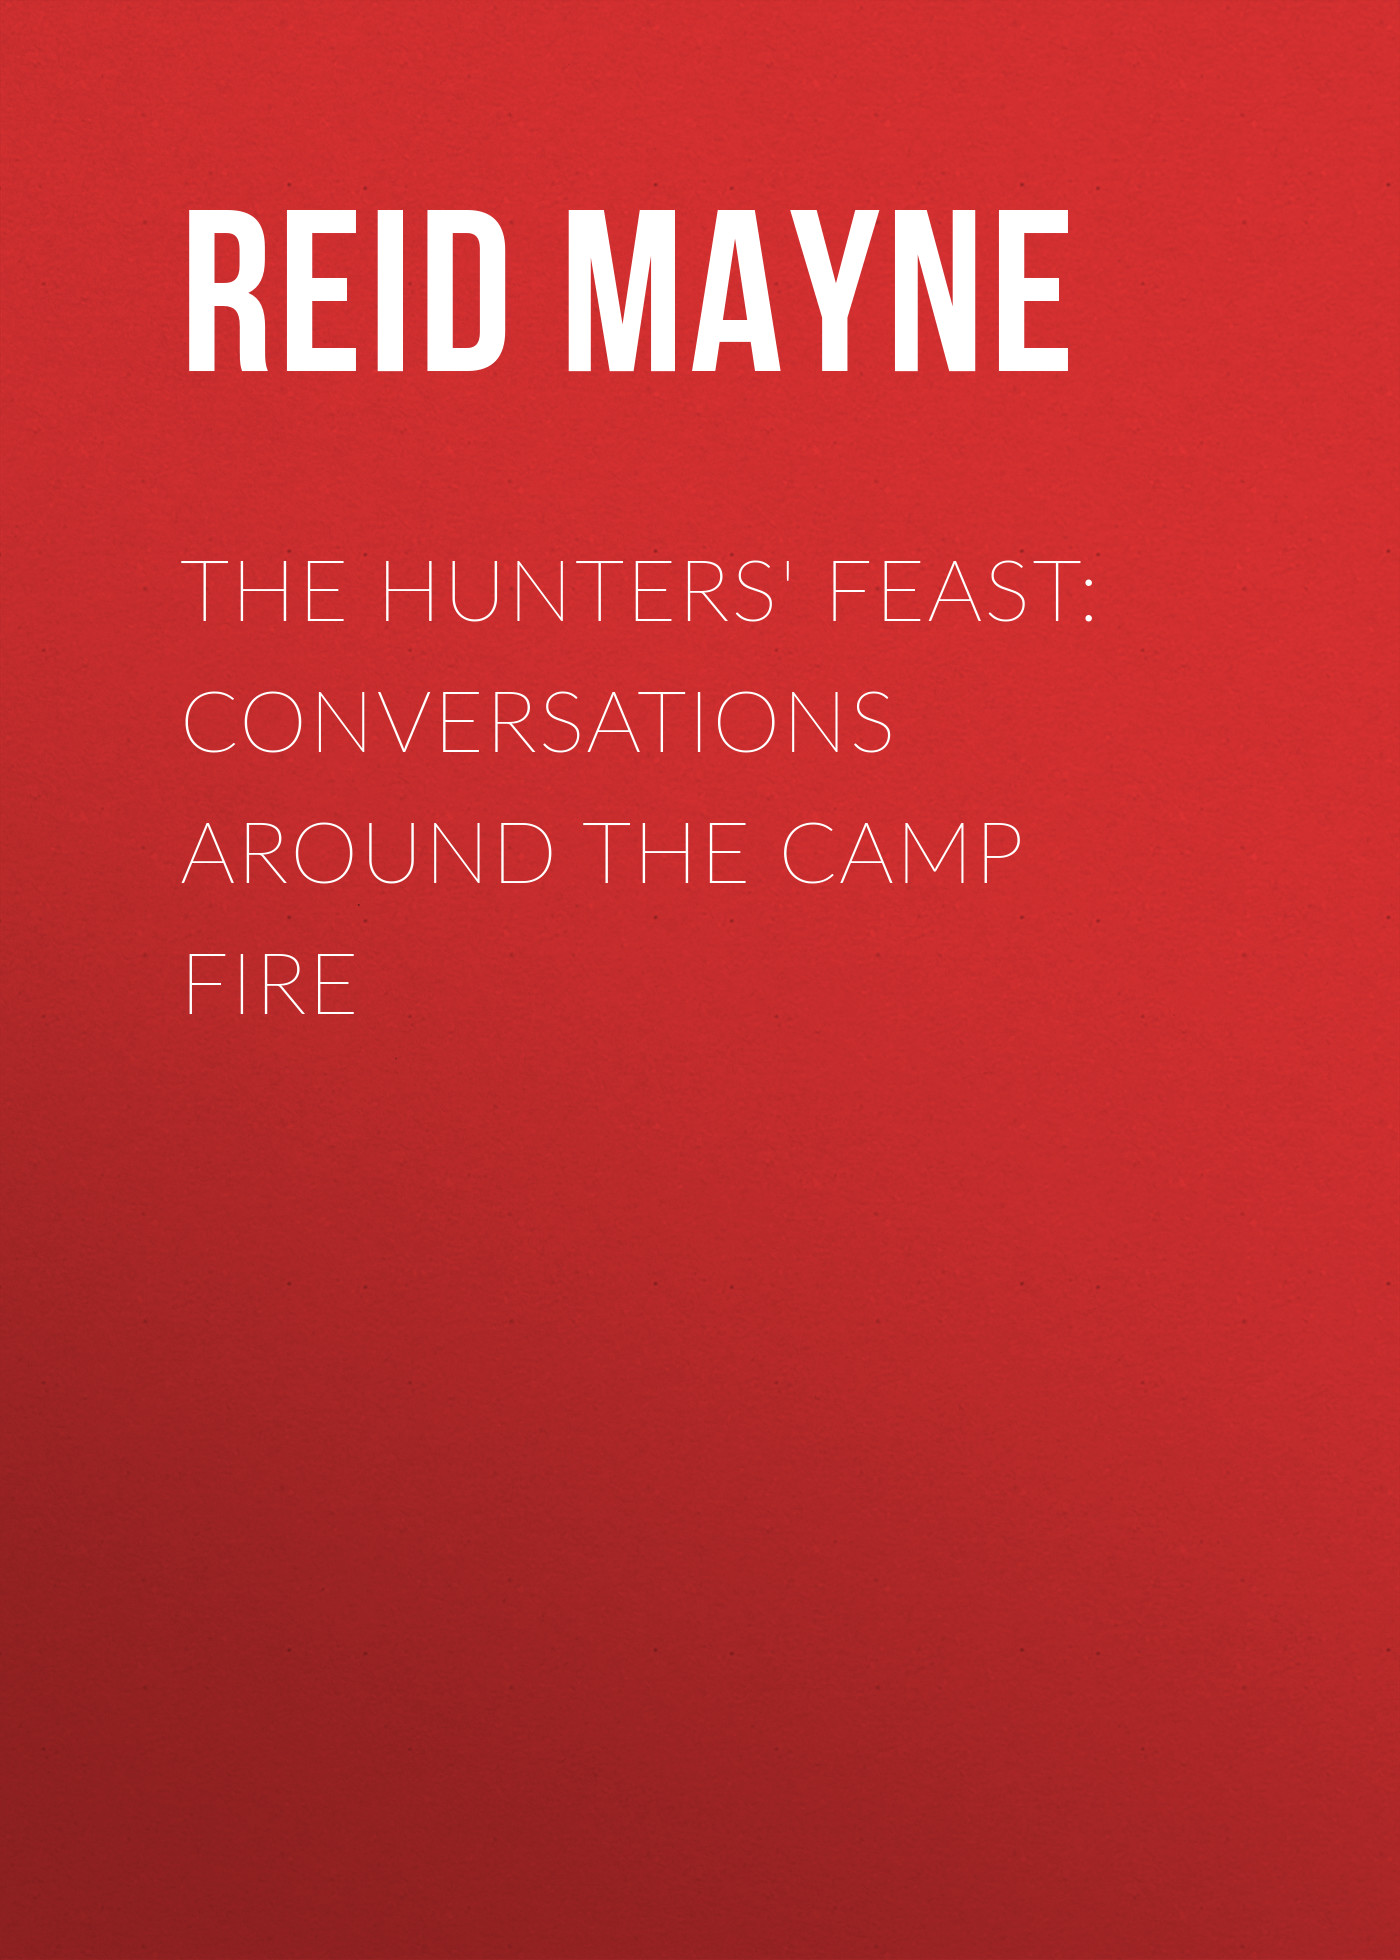 The Hunters'Feast: Conversations Around the Camp Fire